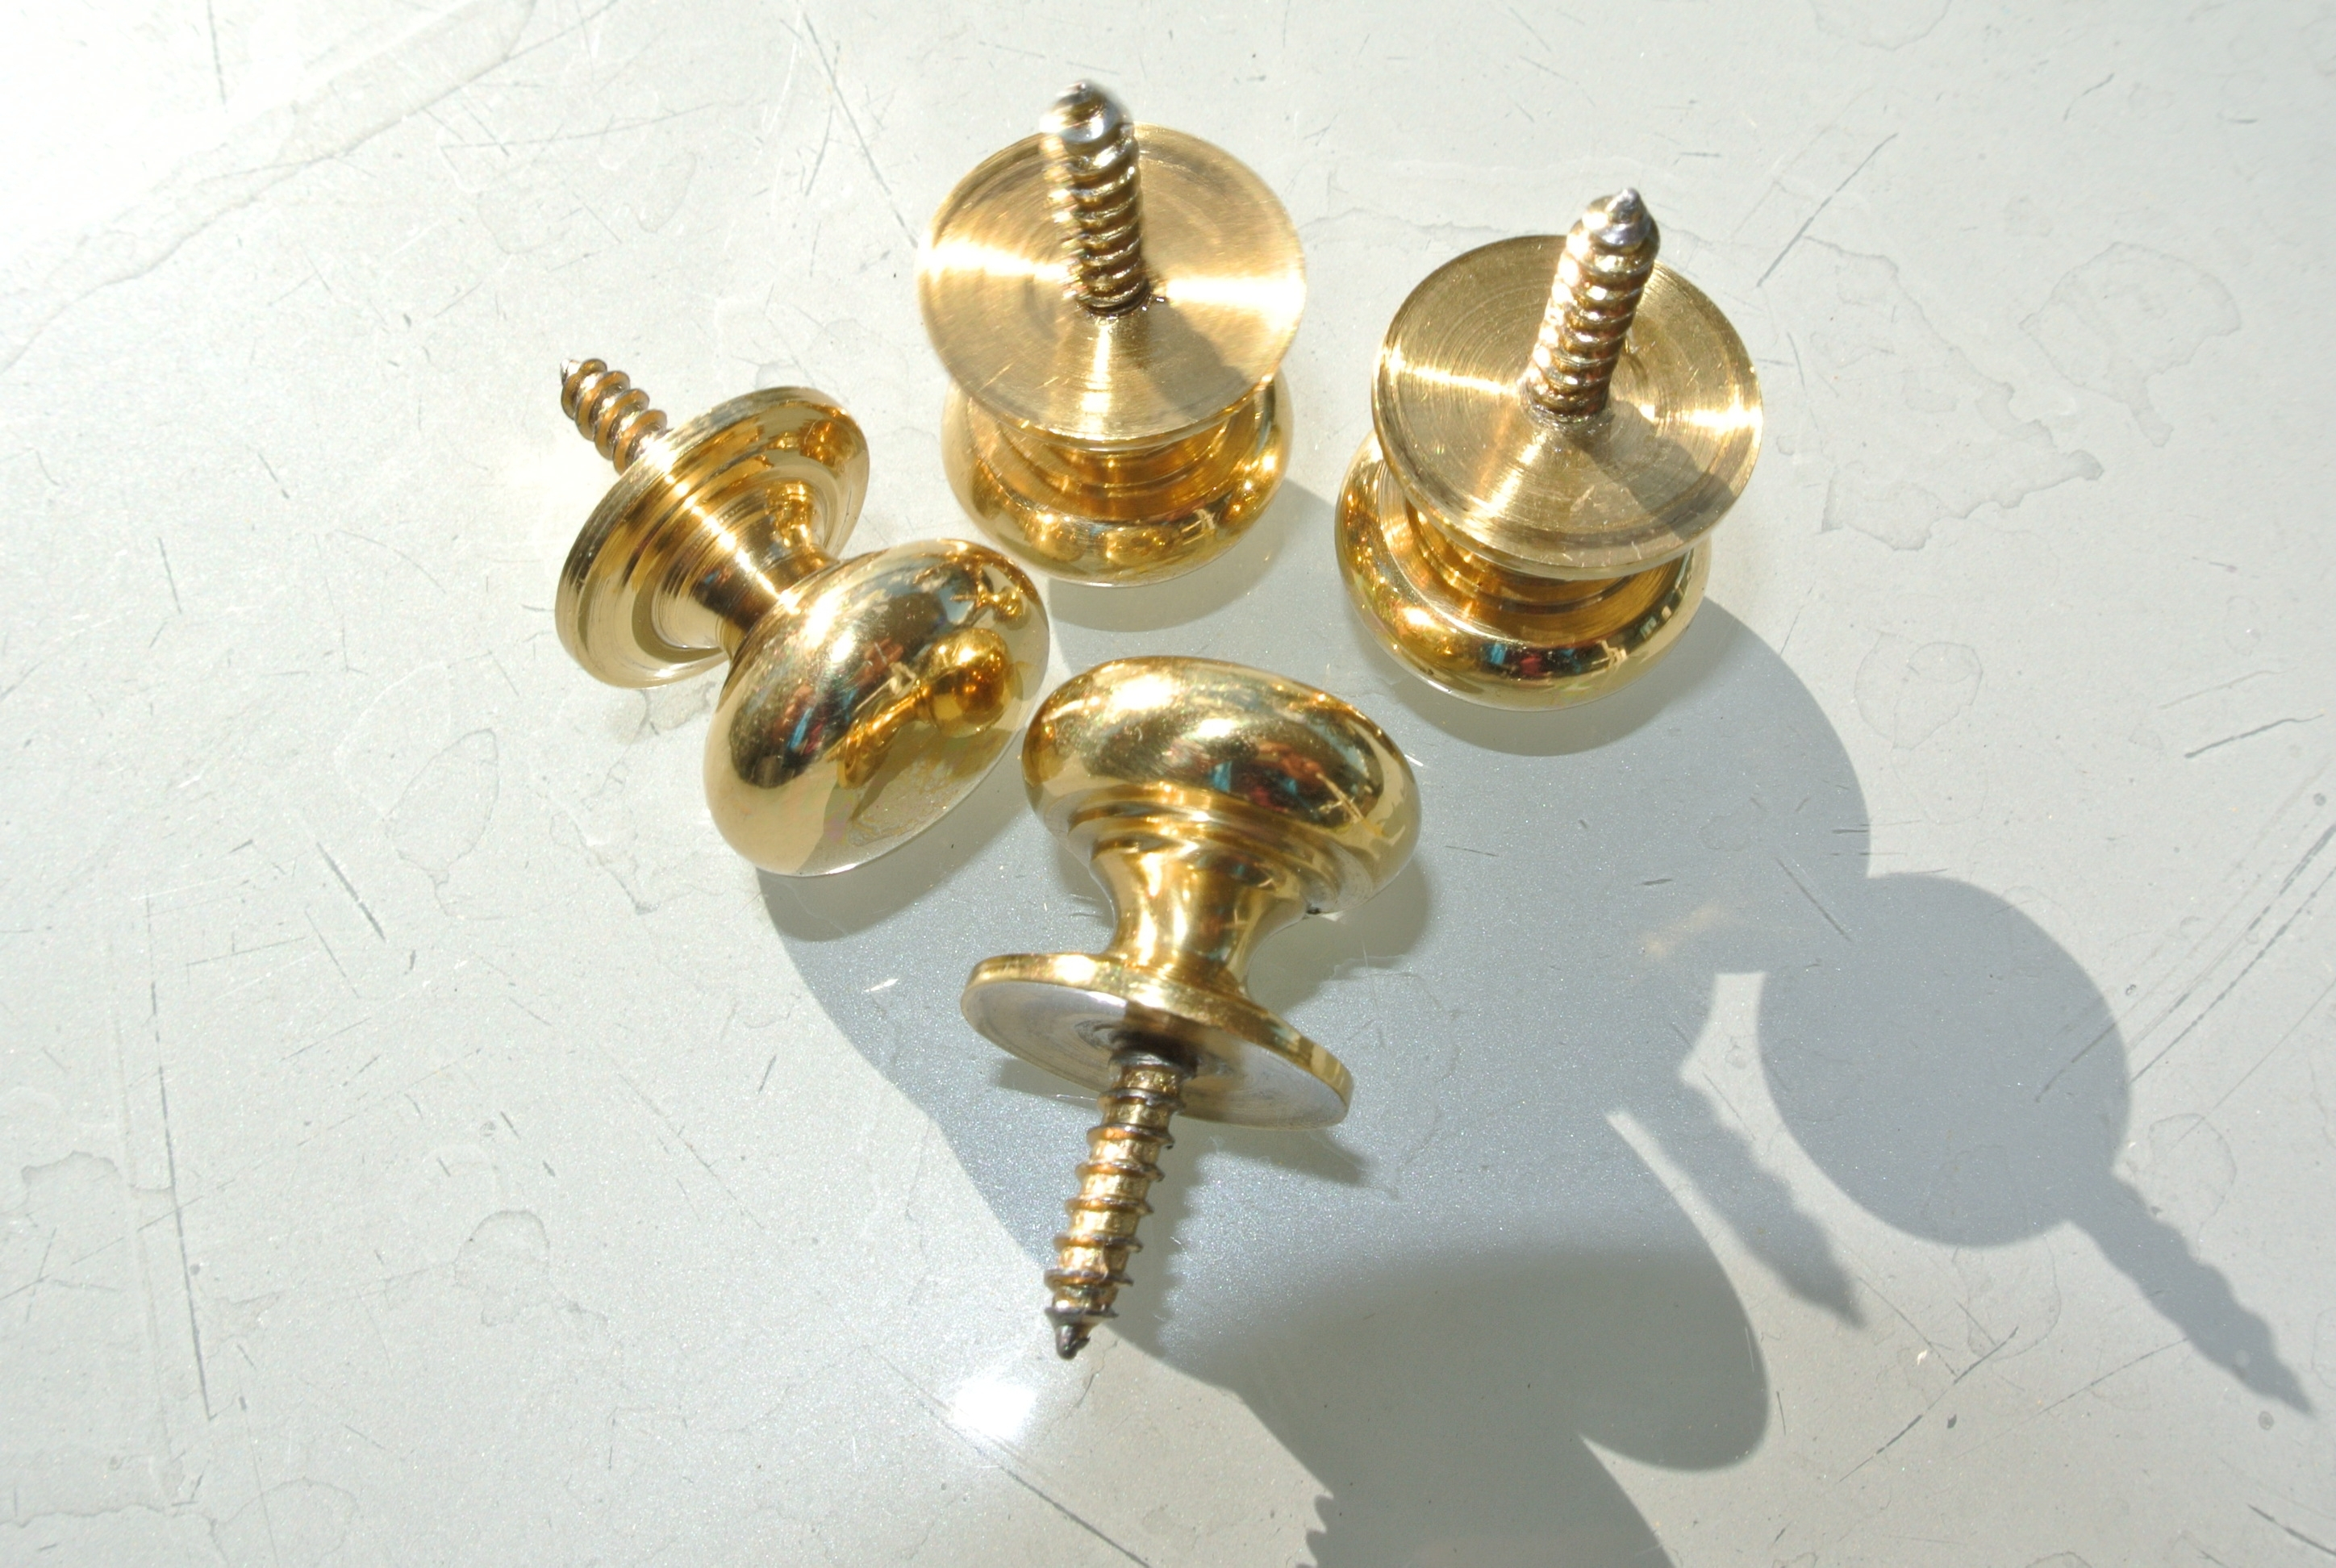 4 Very Small Screw Knobs Pulls Handles Antique Solid Heavy Brass inside dimensions 2896 X 1944